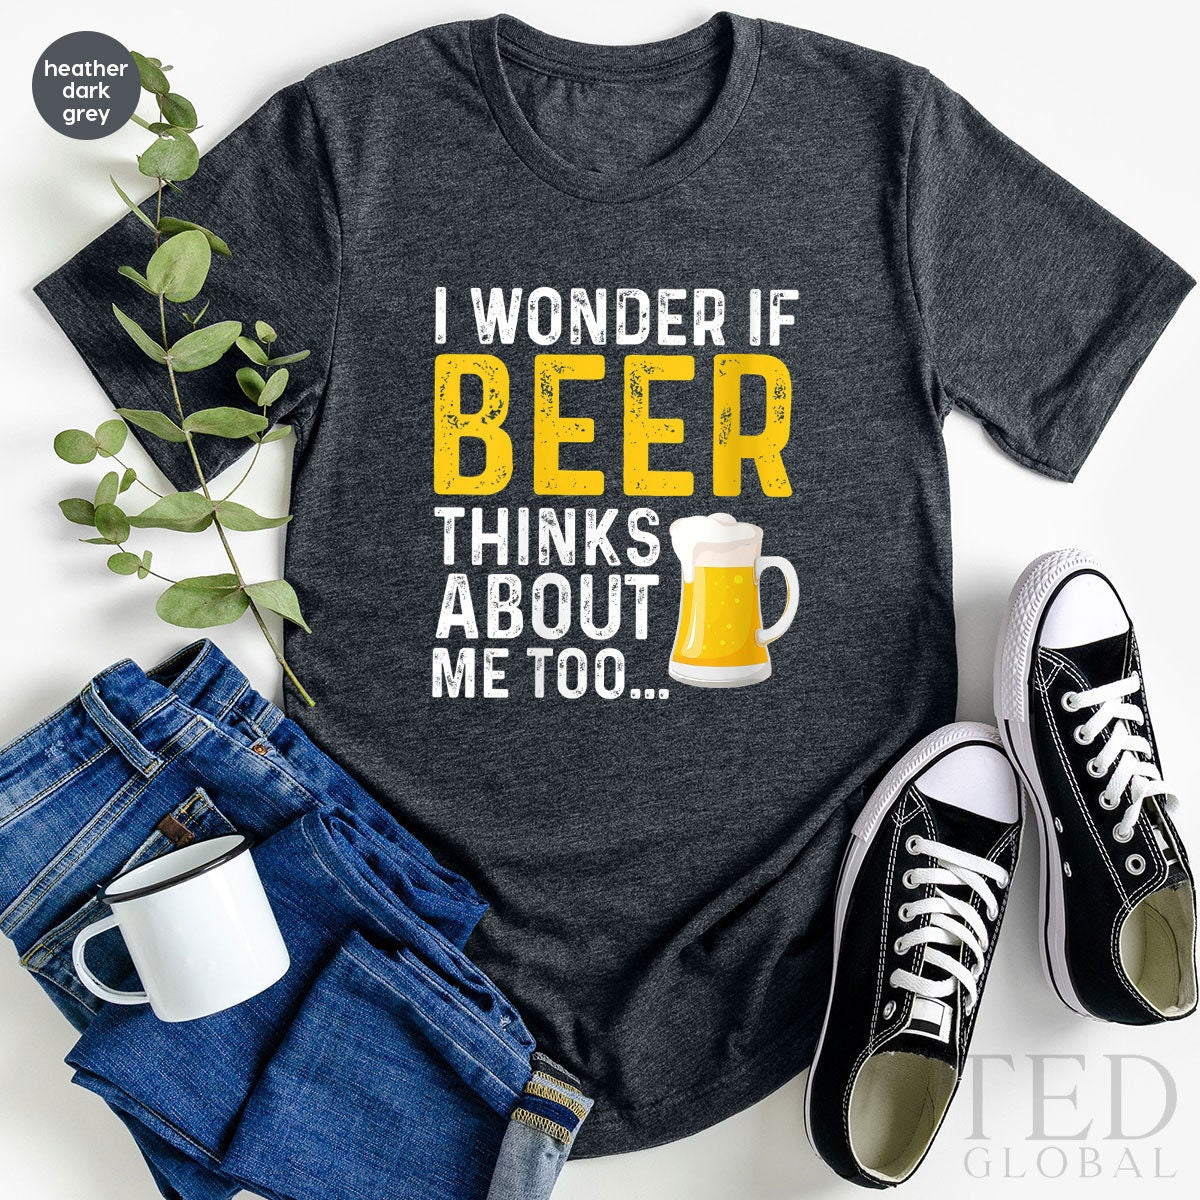 Cute Beer T-Shirt, I Wonder T Shirt, Beer Lover Tee, Alcohol Lover Shirts, Drinking Day Shirt, Funny Drinking TShirt, Gift For Her - Fastdeliverytees.com